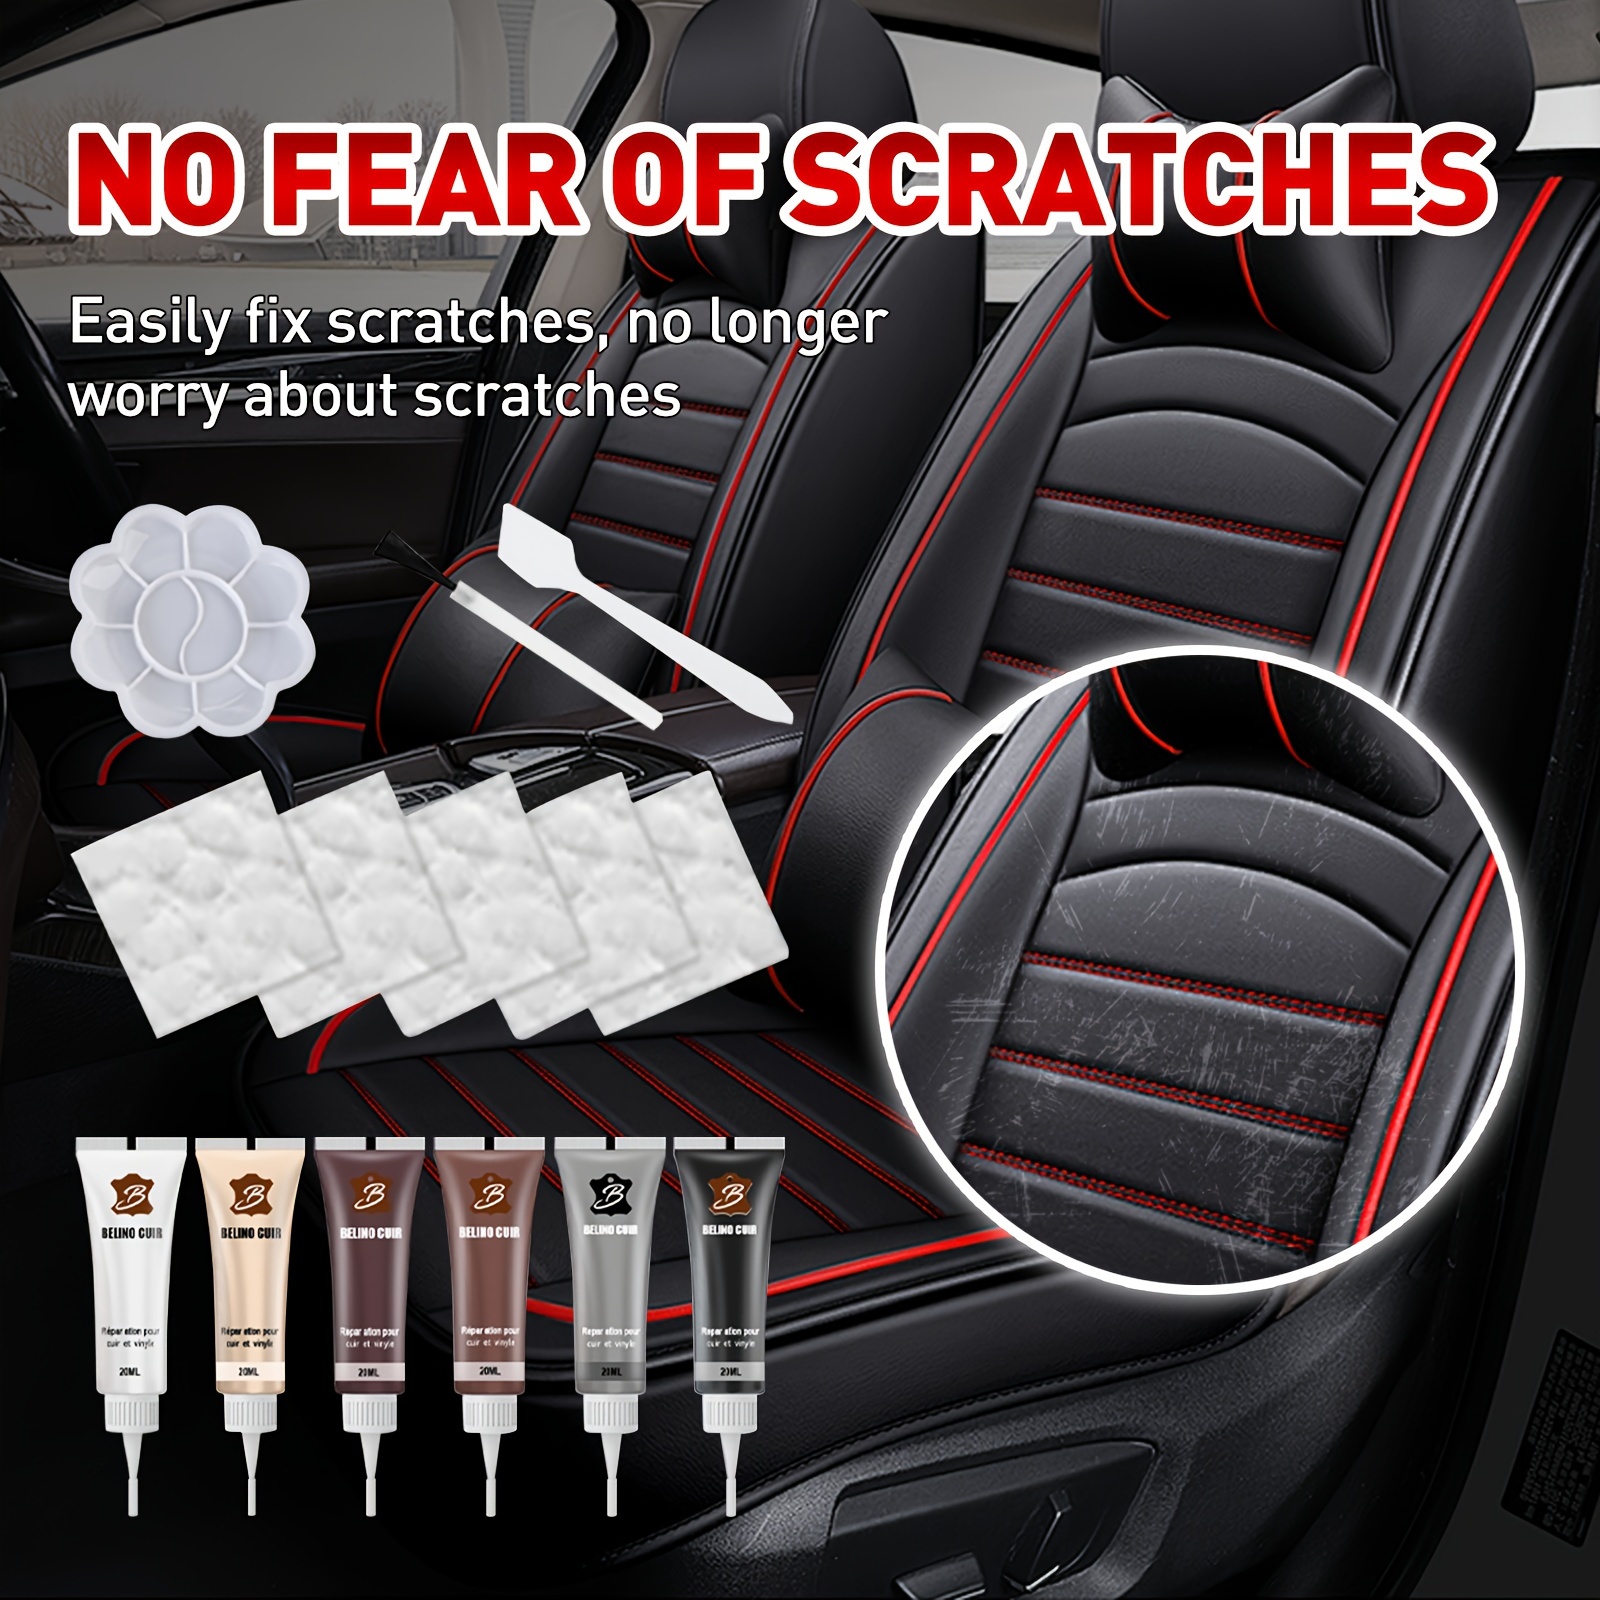 Restore Your Car Seats & Steering Wheel with 20ml Leather Repair Gel - Home  Leather Refurbishment Made Easy!